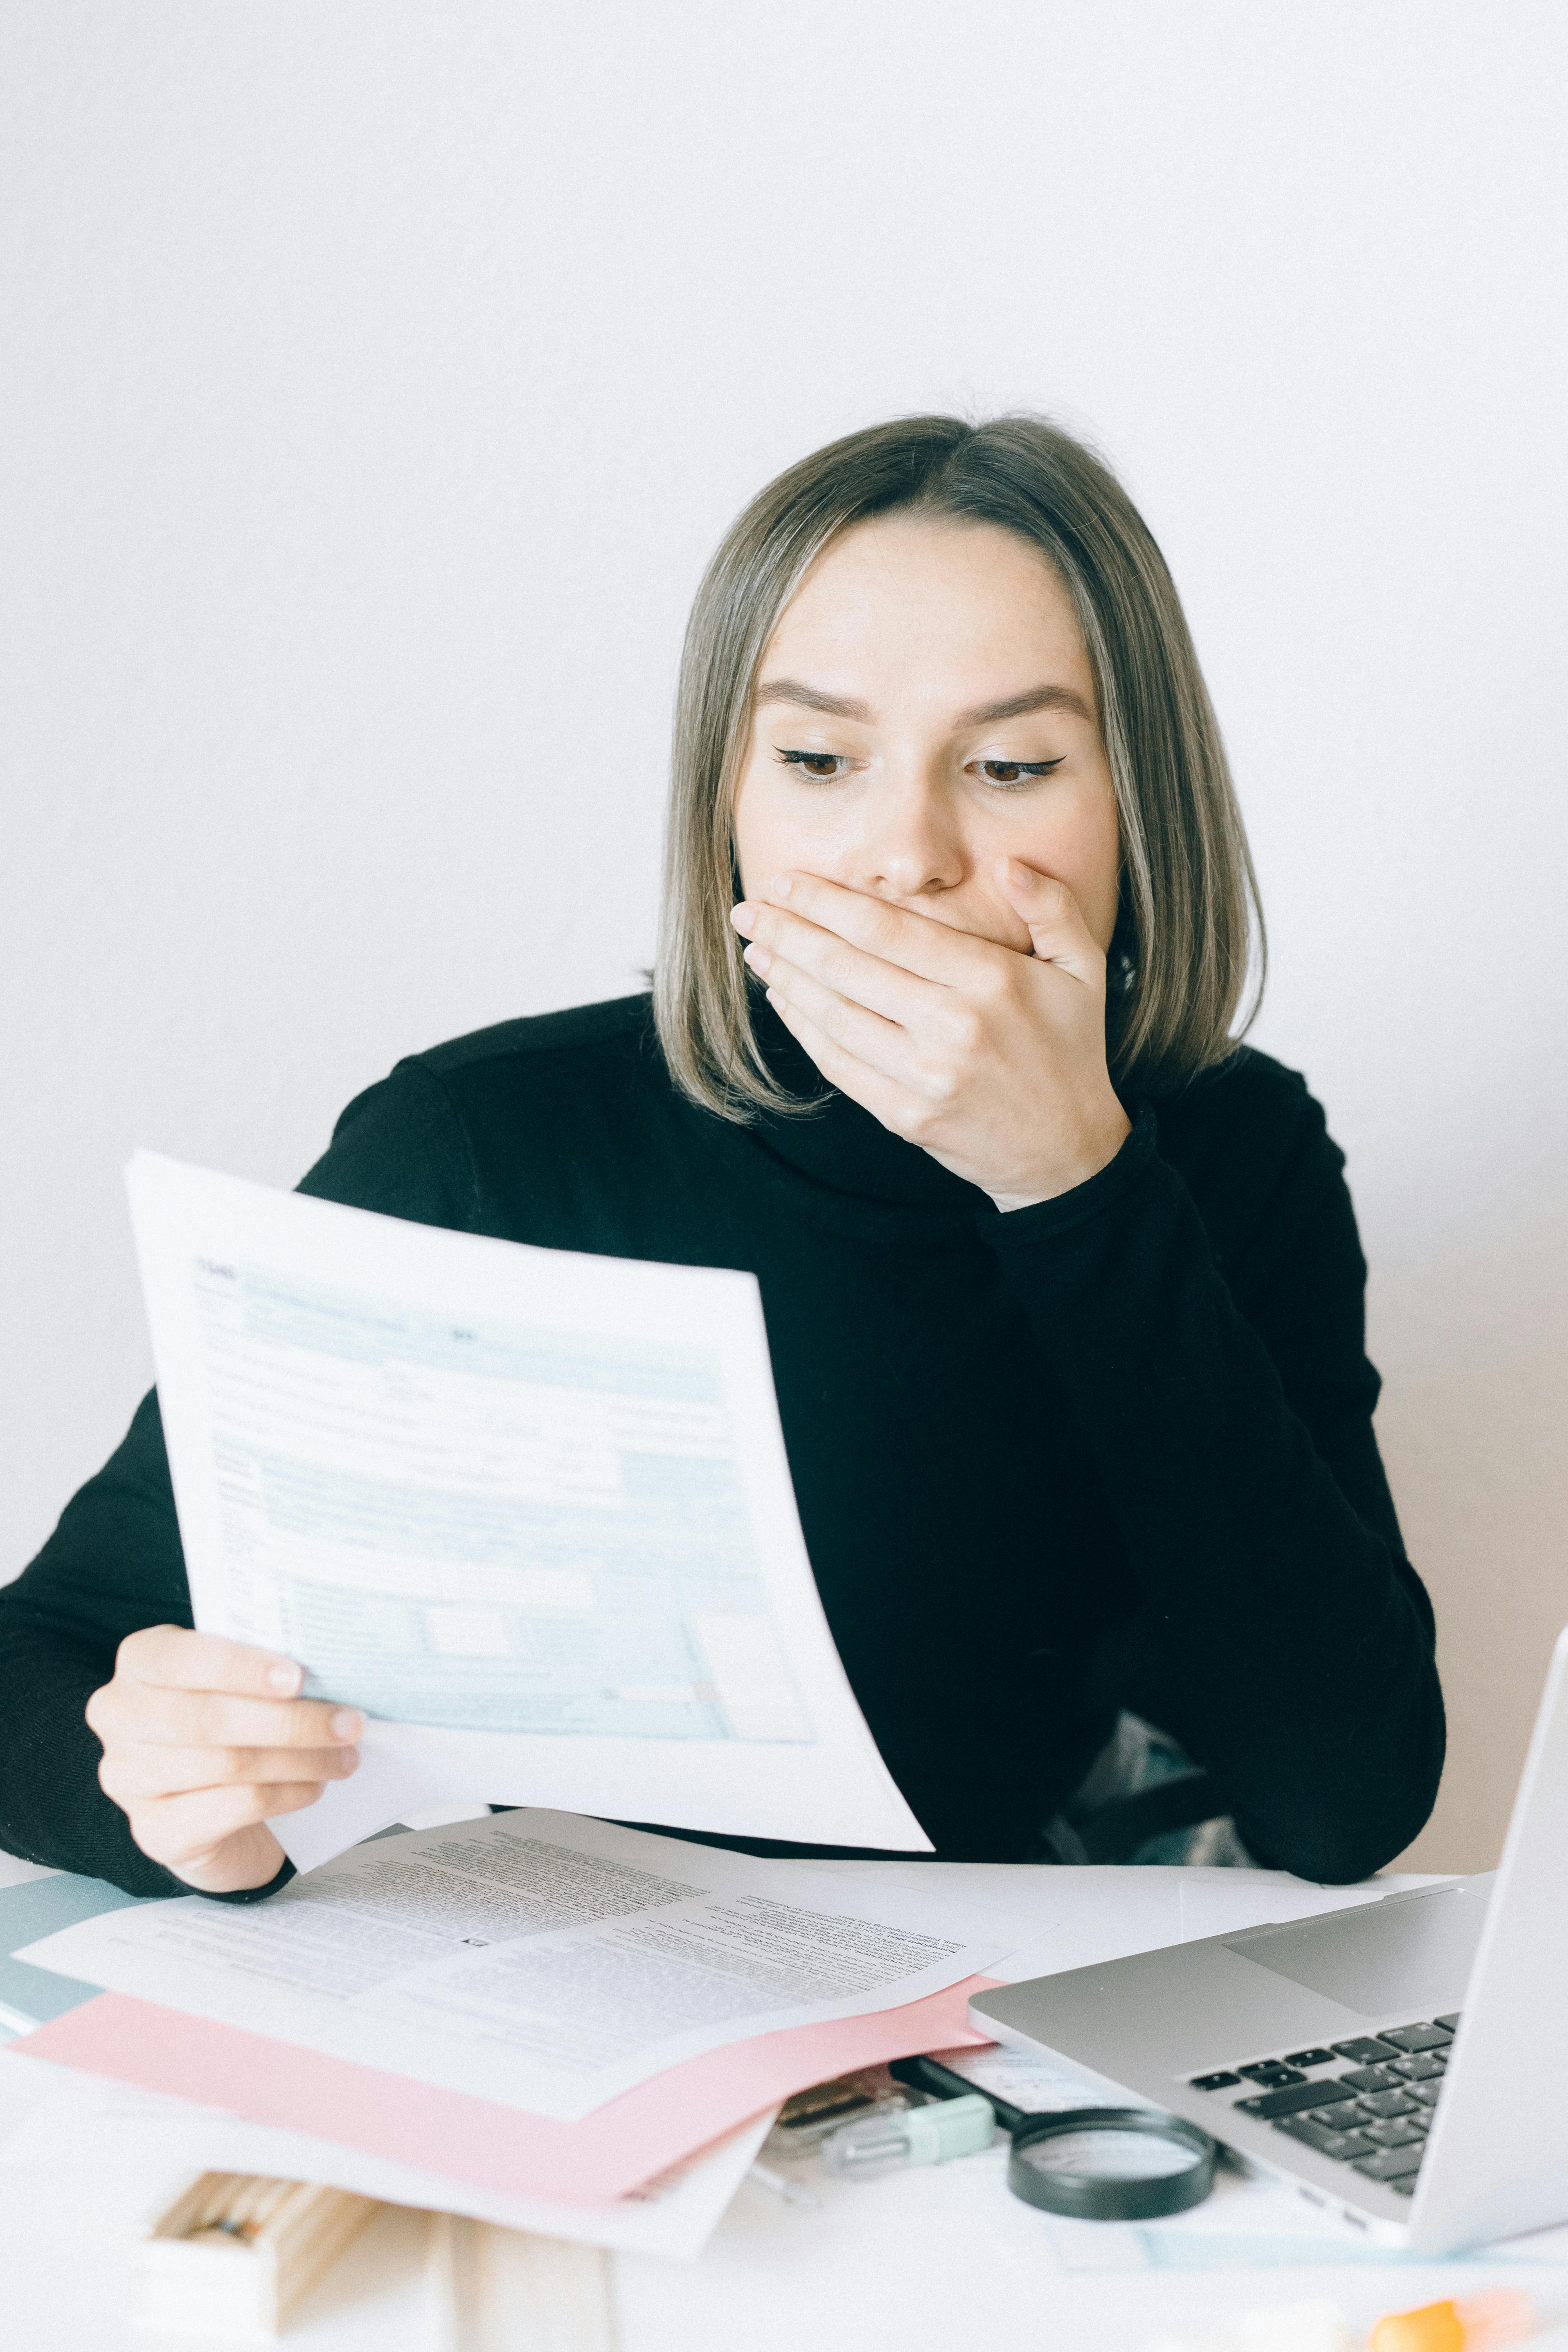 Shocked woman looks at a report | Source: Pexels